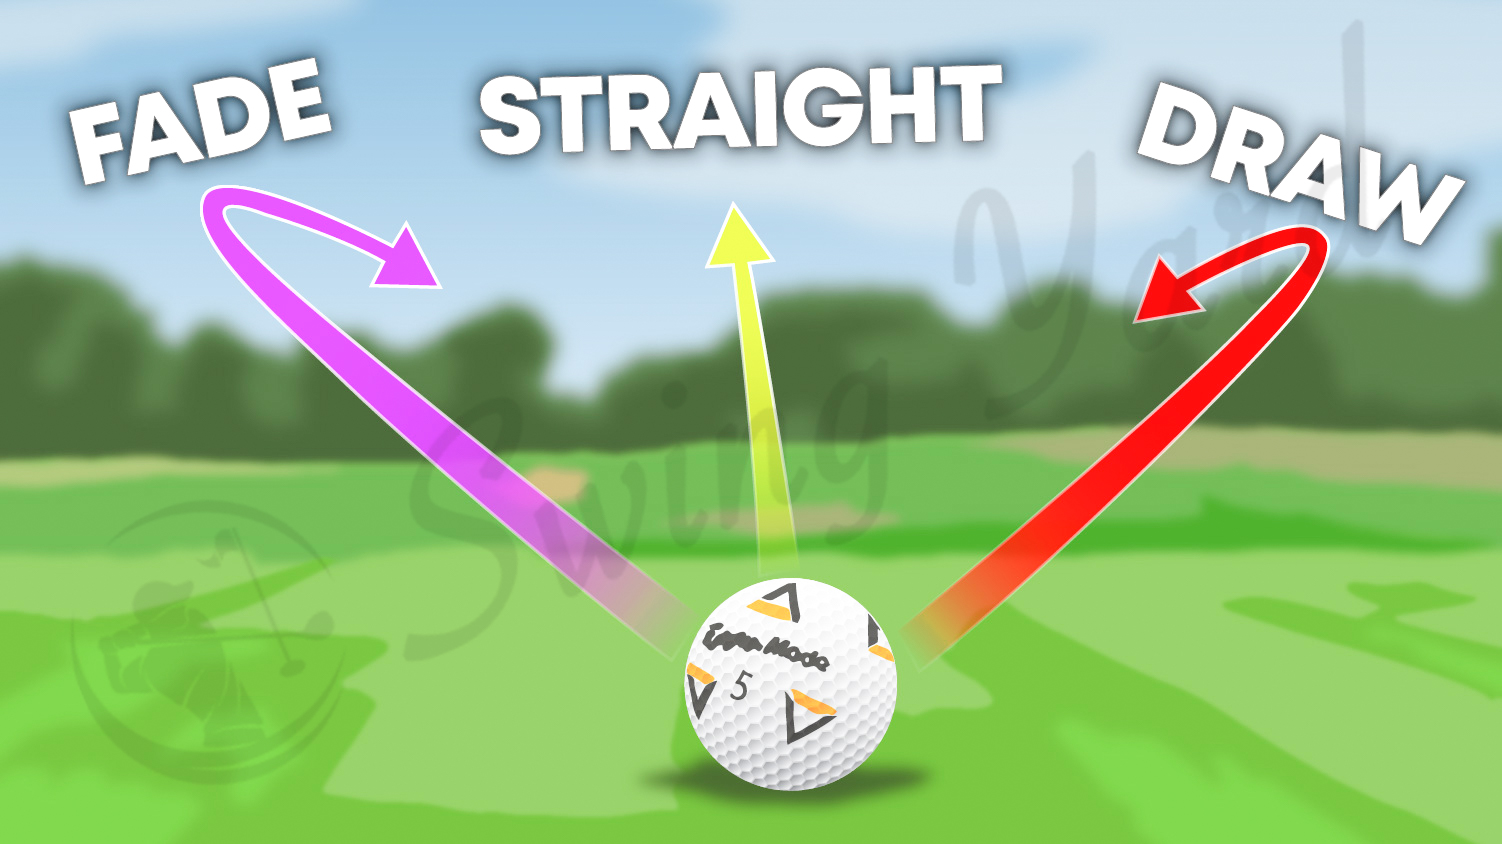 golf ball directions of fade, straight and draw